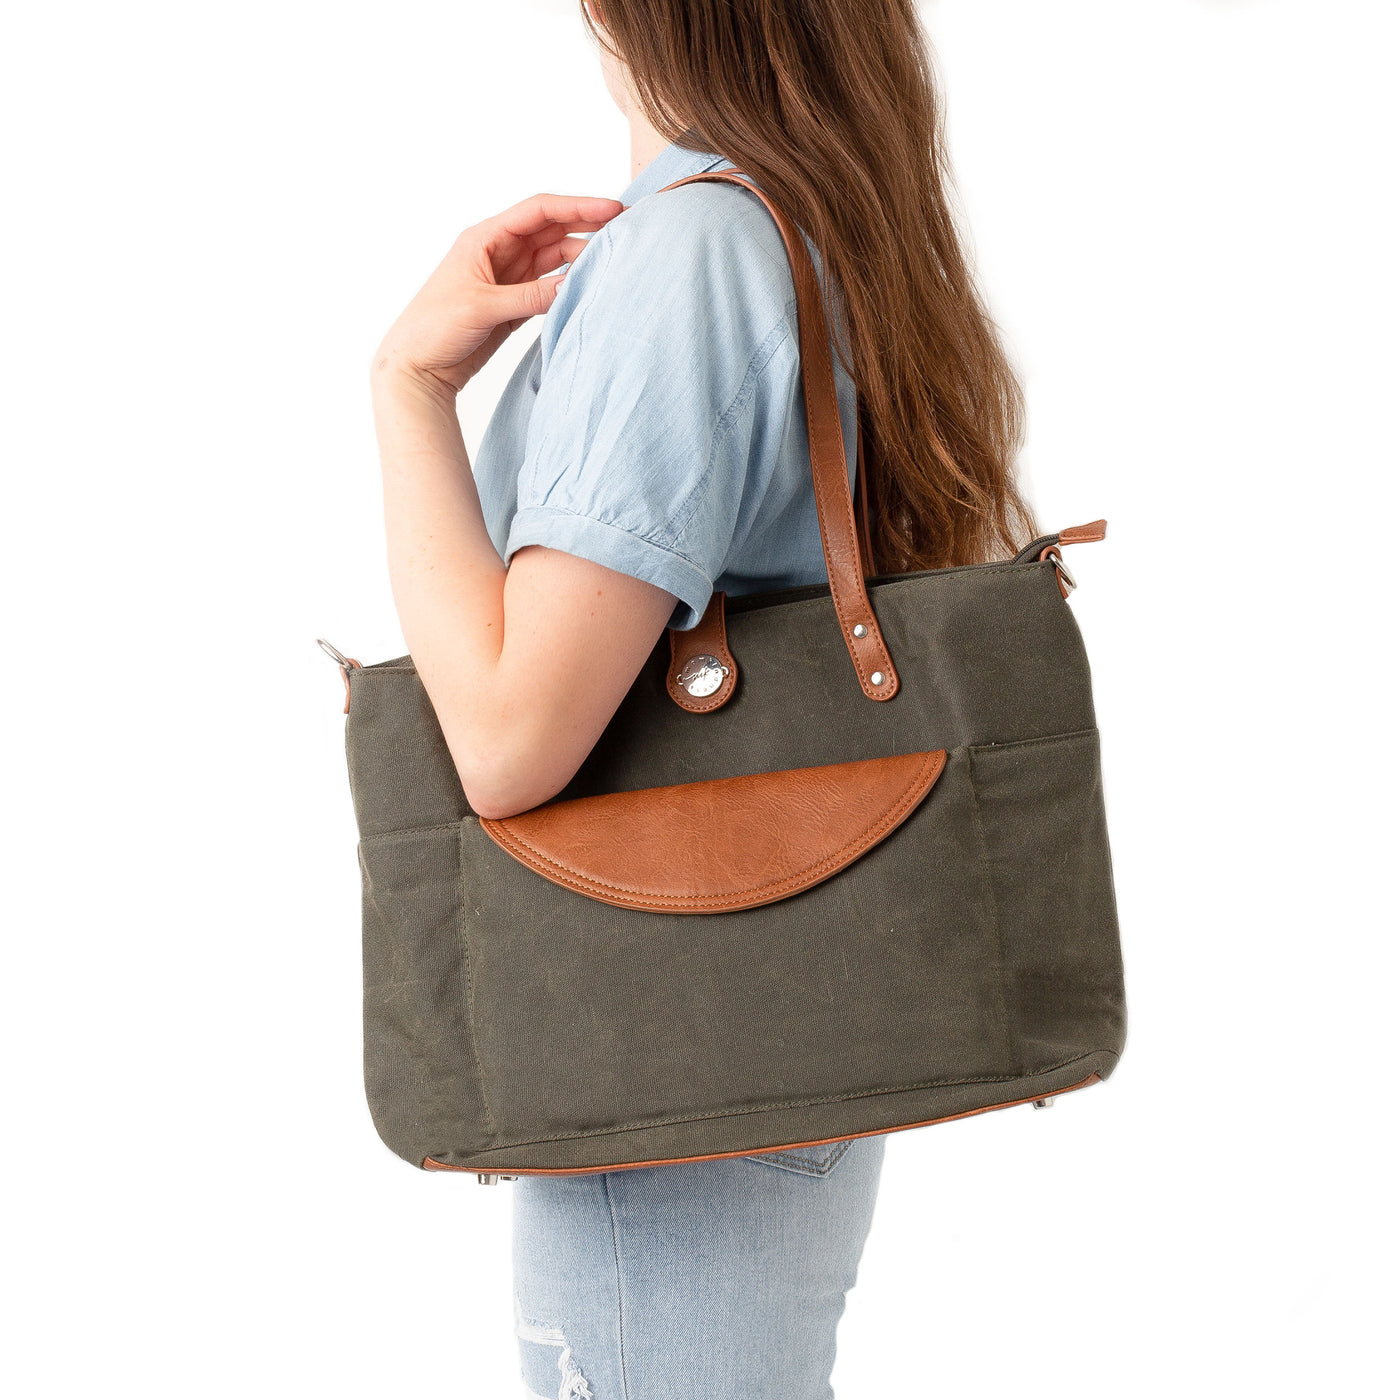 Woman in a blue blouse and jeans standing sideways and carrying a forest green waxed canvas carryall tote with caramel brown vegan leather accents, positioned against a white background.